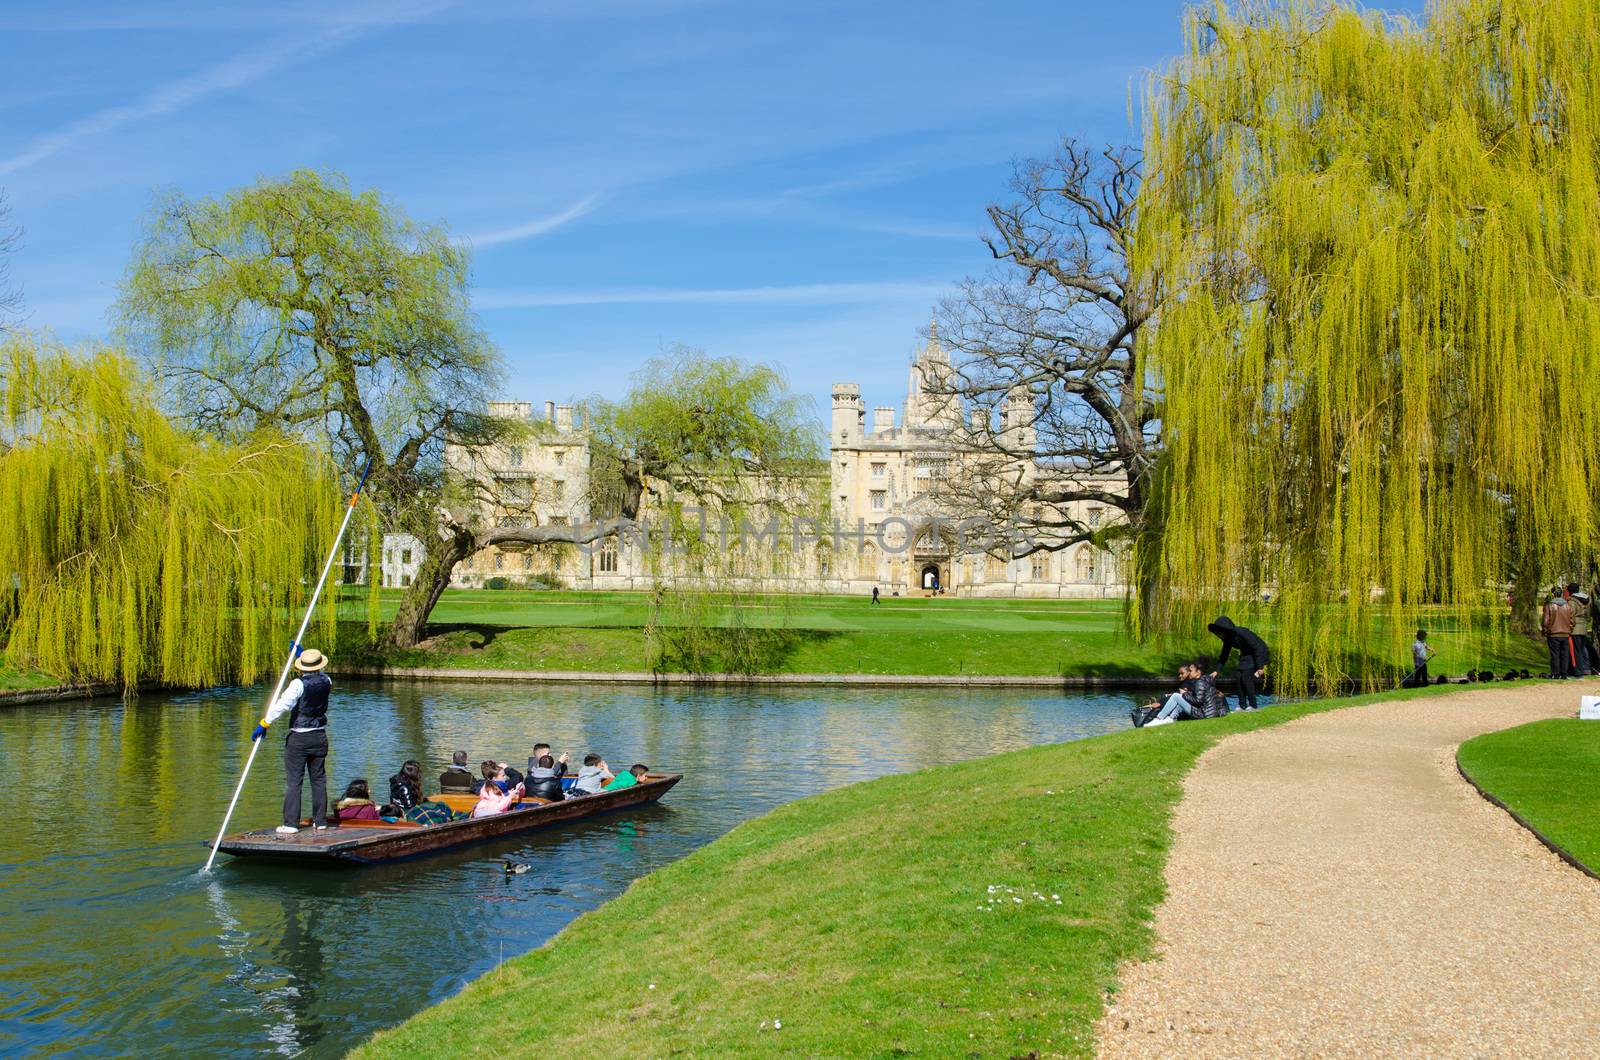 Punting on the back of the Colleges in Cambridge in a sunny day with a view on Saint John College, United Kingdom